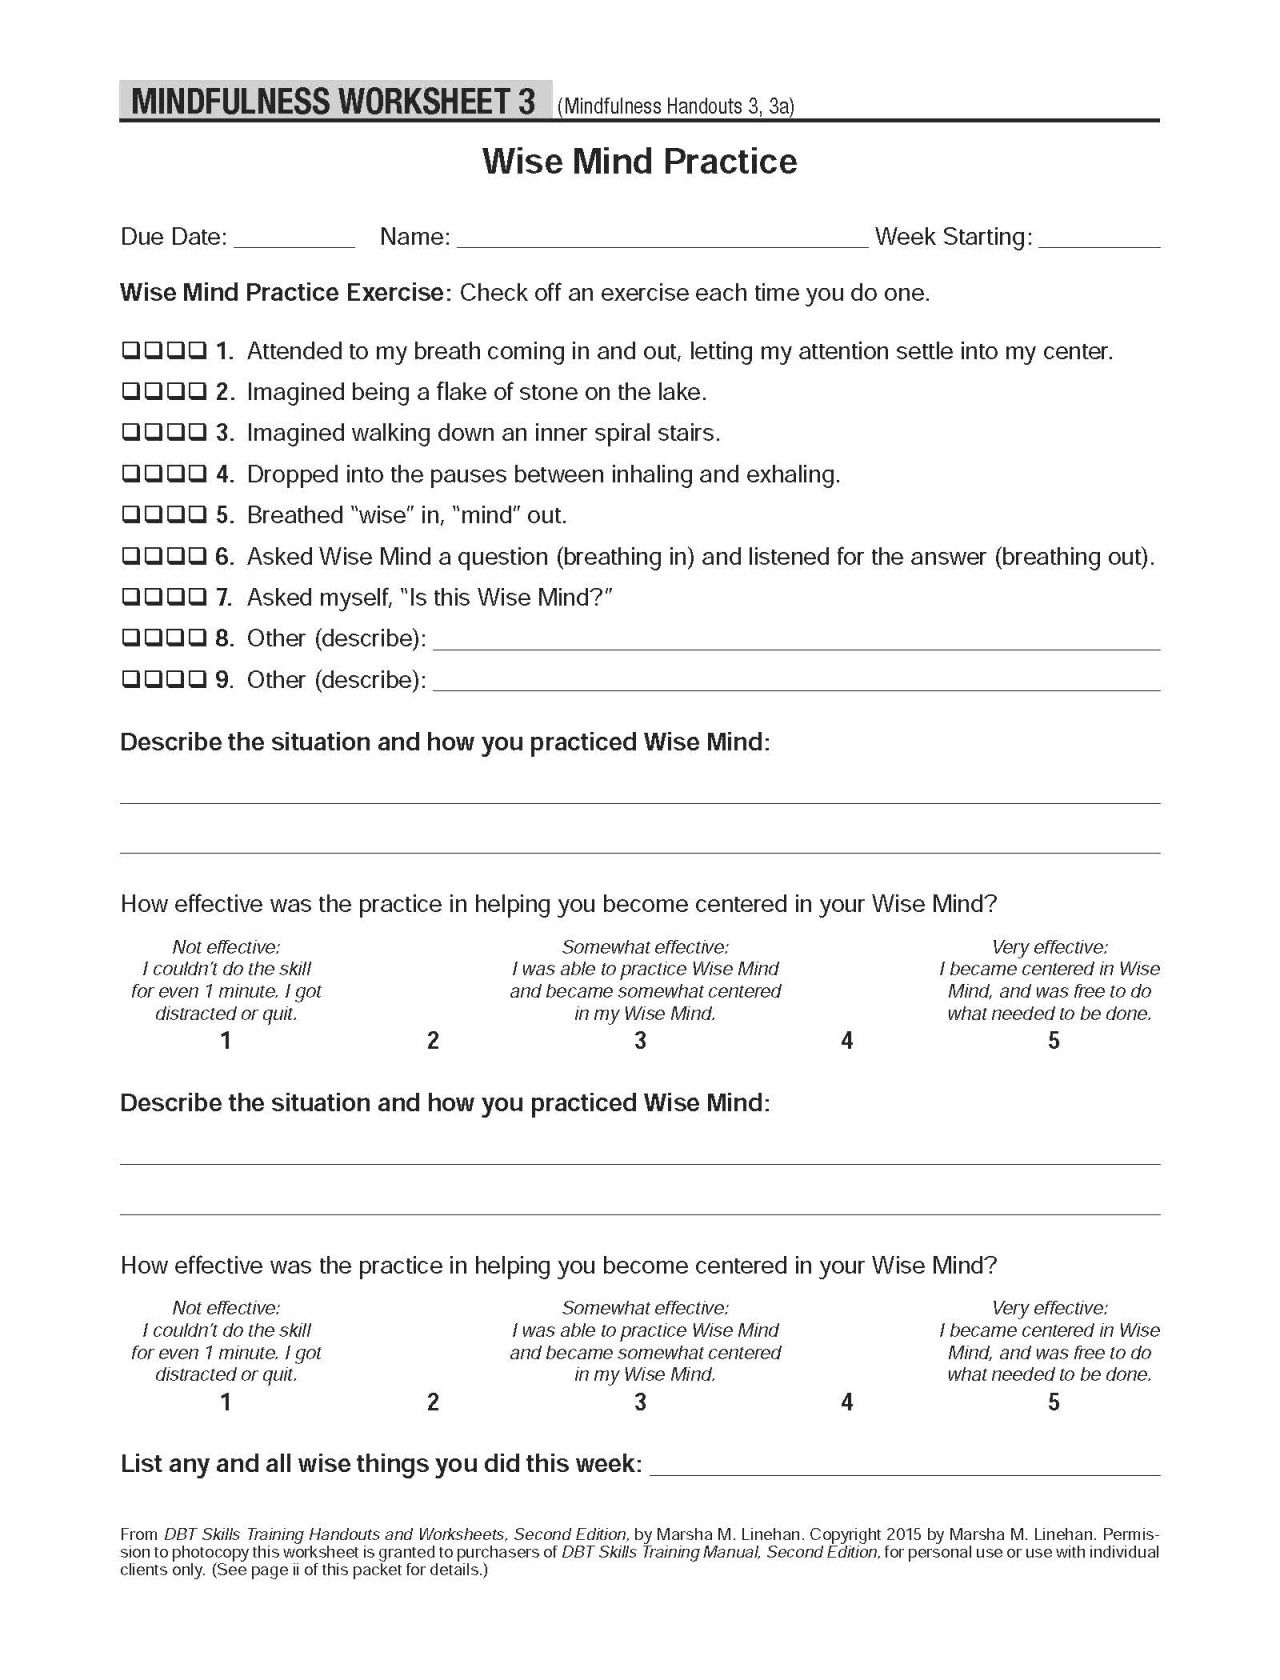 DBT Mindfulness Worksheets For Adults